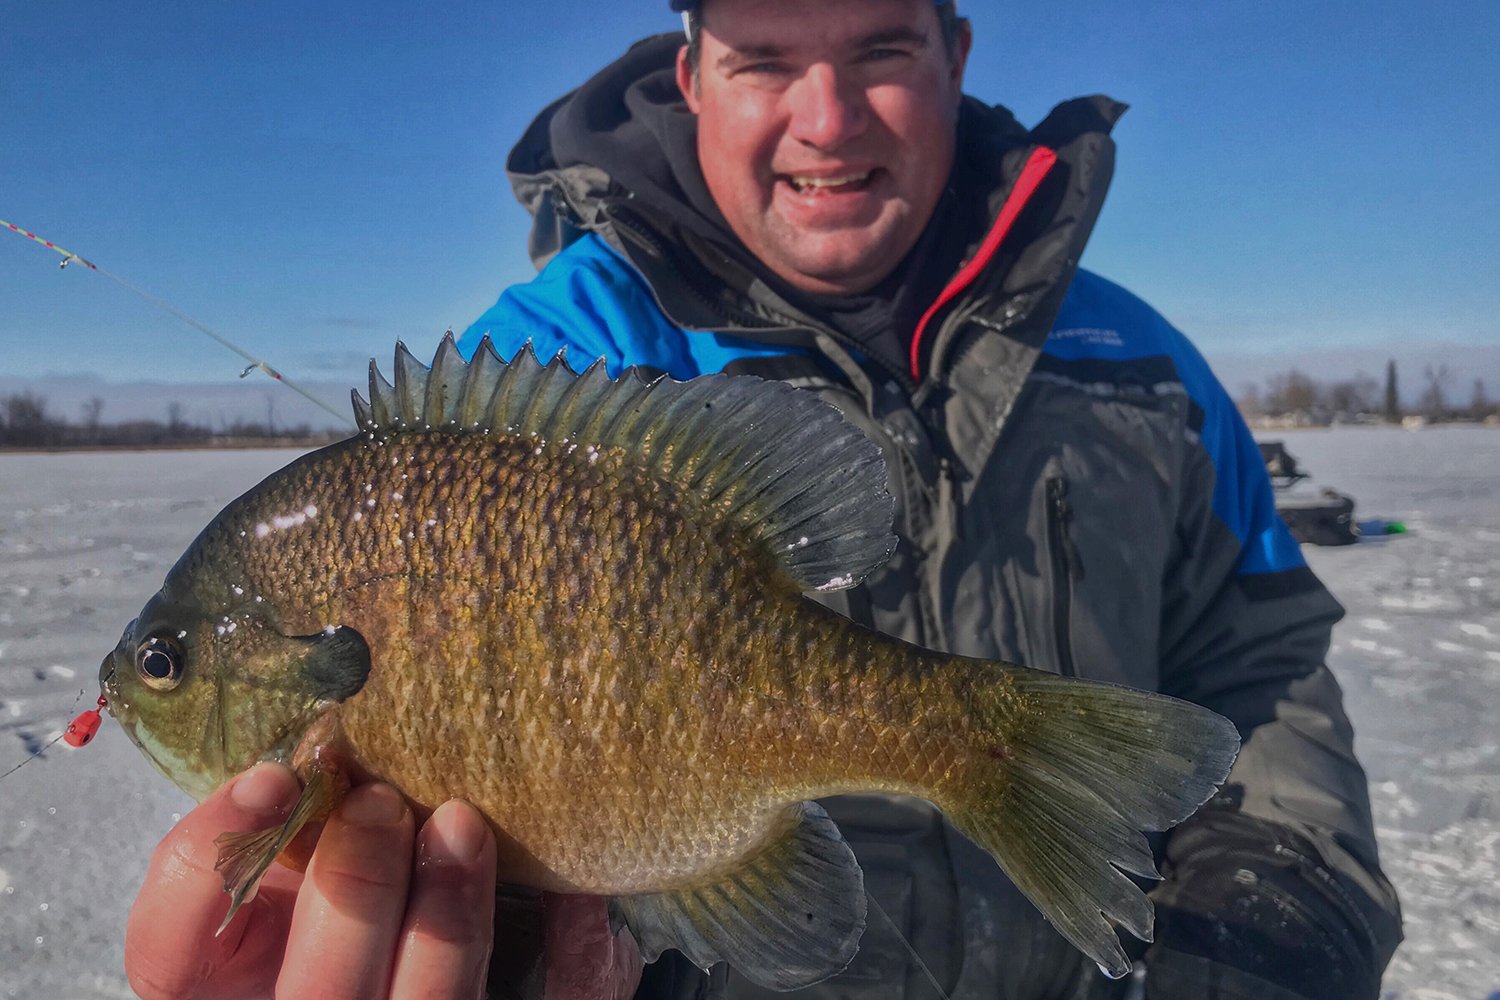 Giant bluegill caught in IL - General Angling Discussion